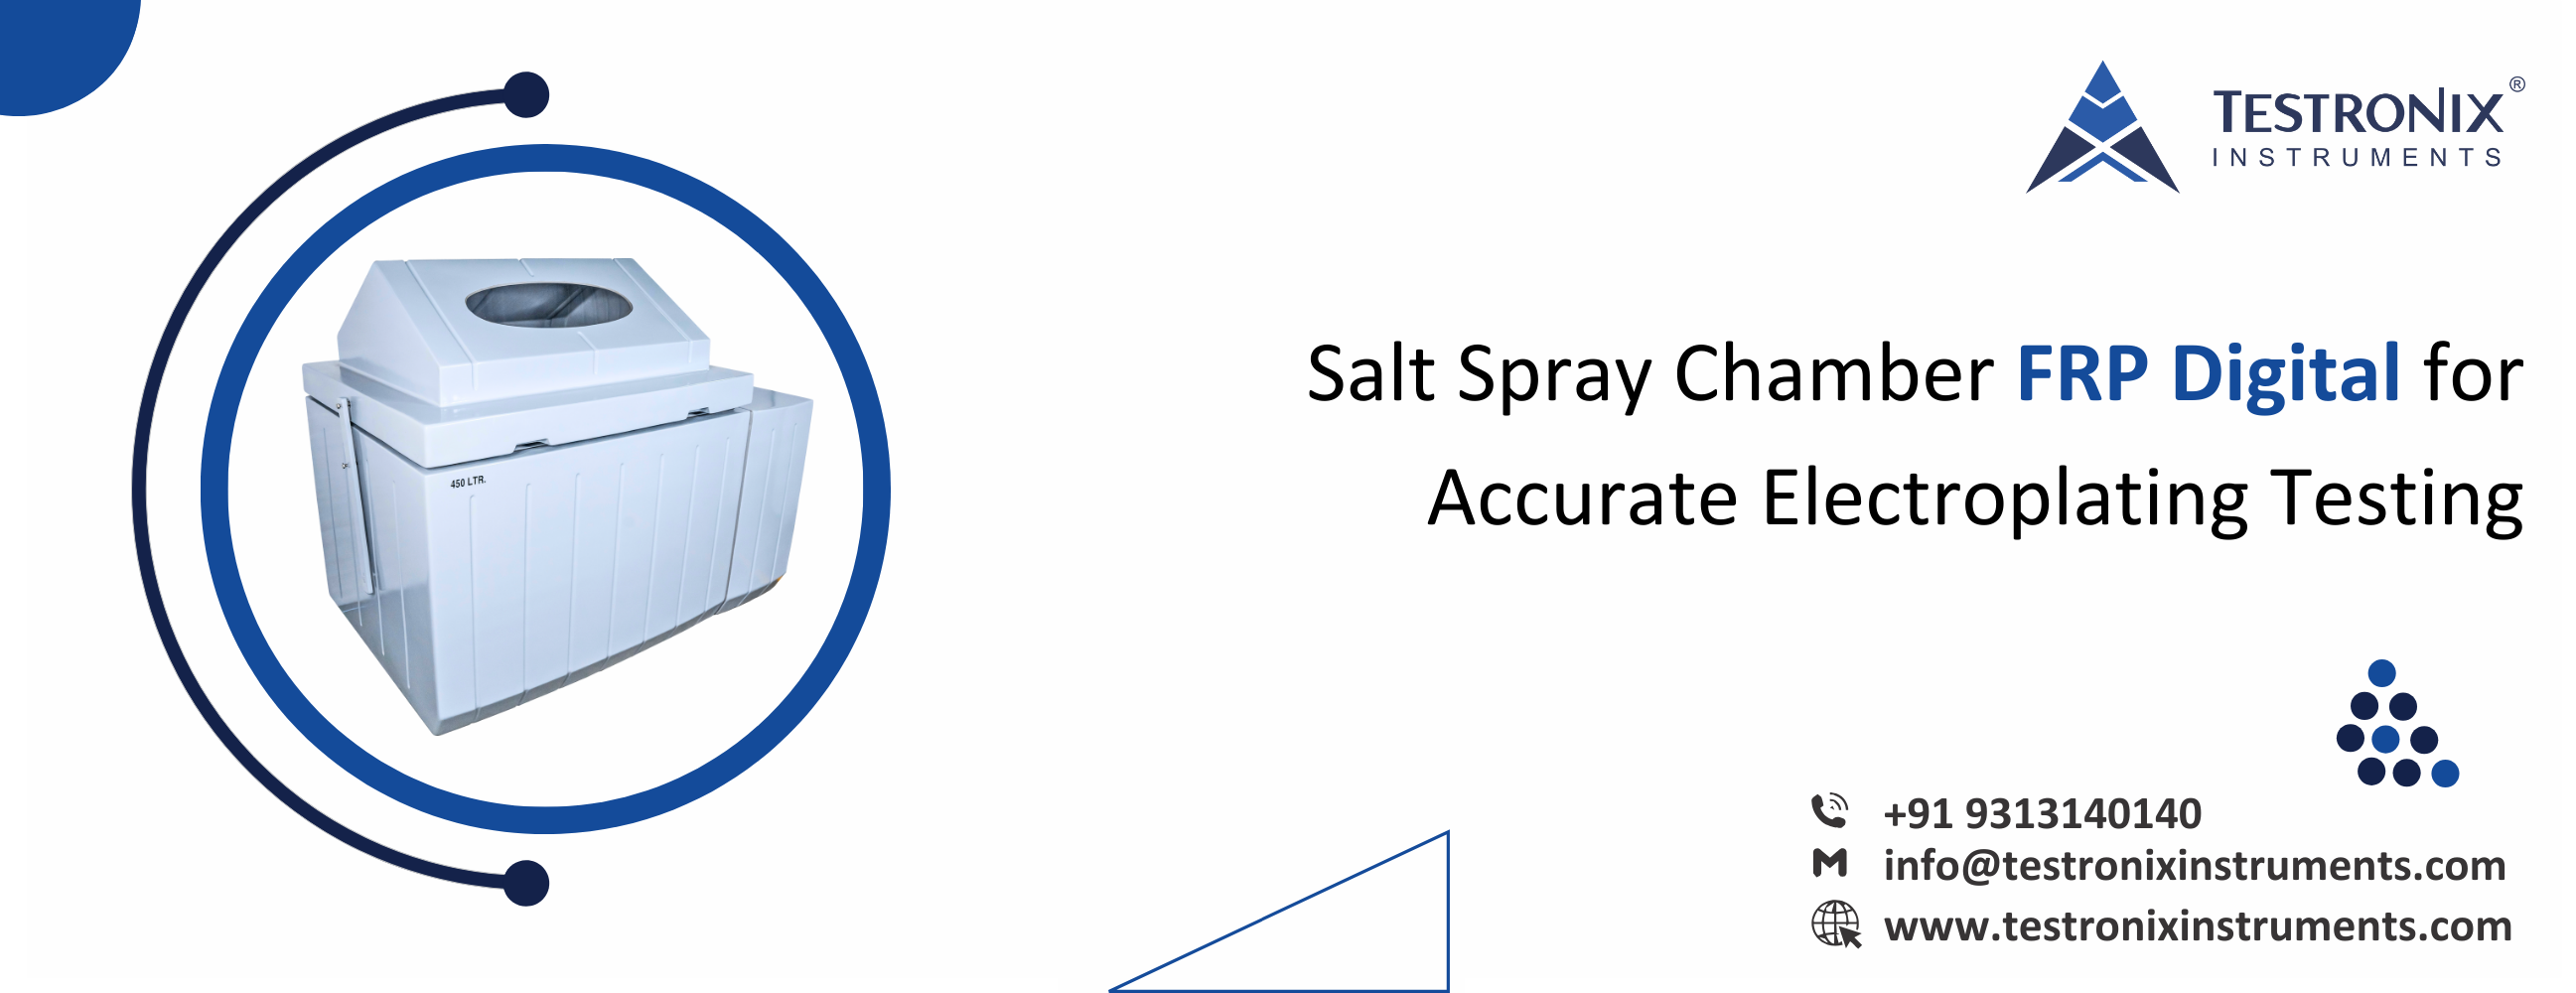 Salt Spray Chamber FRP Digital for Accurate Electroplating Testing